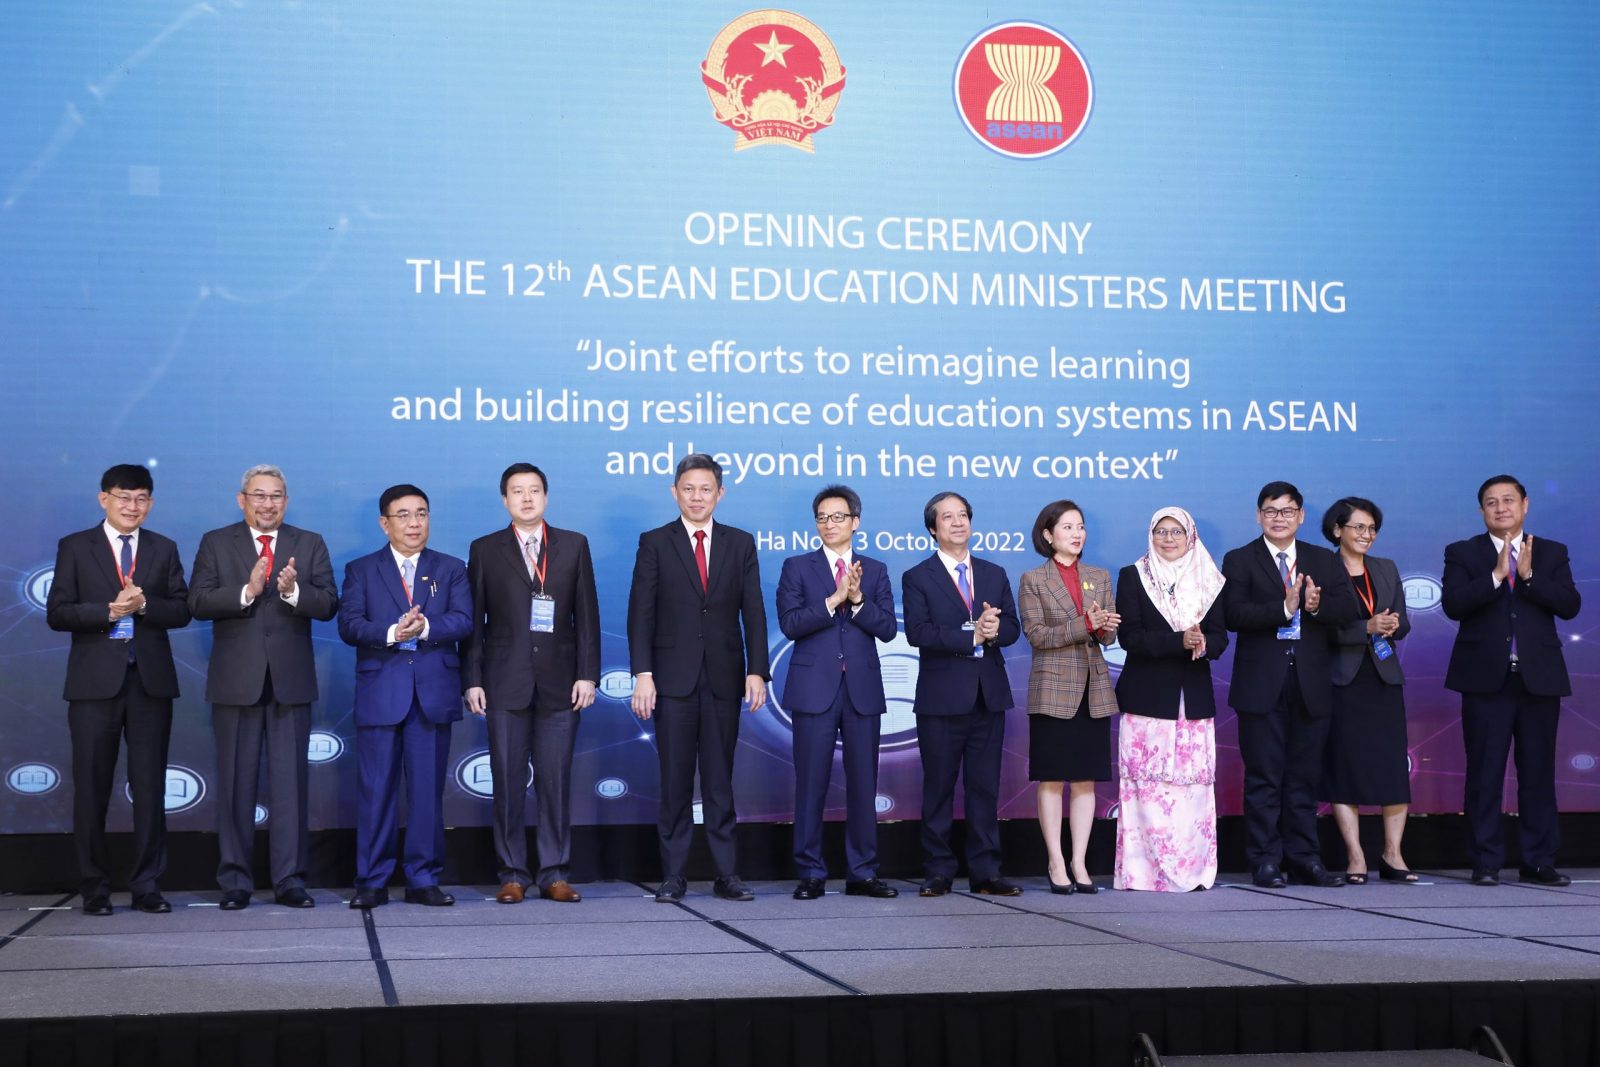 epa10240108 Education Ministers of the Association of Southeast Asian Nations (ASEAN) pose for a group photo during the opening ceremony of the 12th ASEAN Education Ministers Meeting (ASED) in Hanoi, Vietnam 13 October 2022. The 12th ASEAN ASED and related meetings are held from 11 to 14 October in Hanoi.  EPA/LUONG THAI LINH